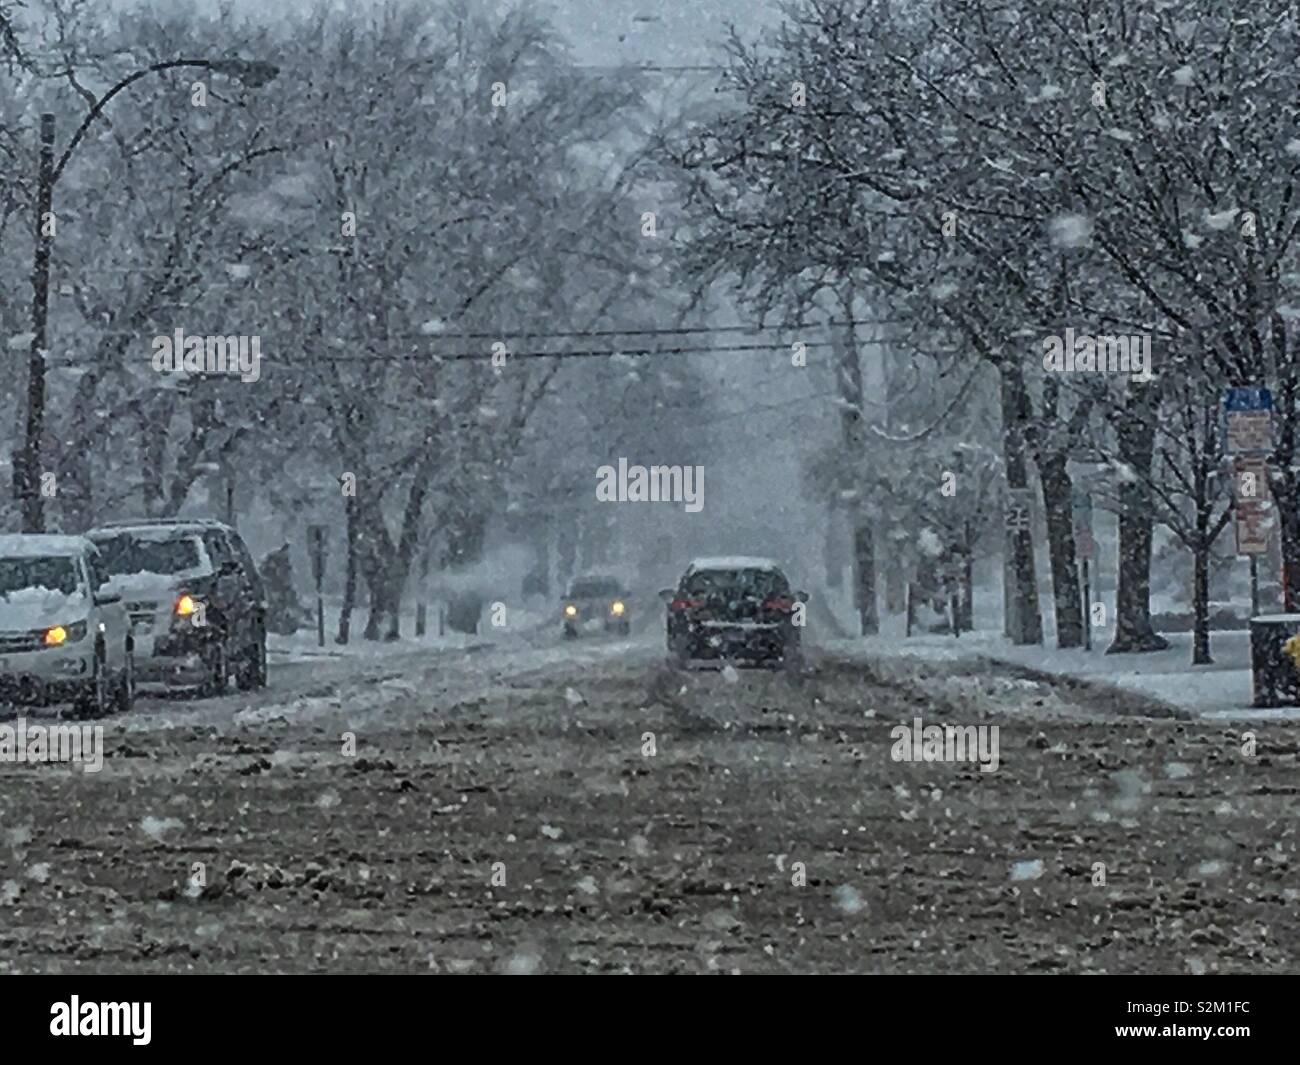 Harsh winter weather scene of a snow storm blowing snow around a boulevard. Stock Photo